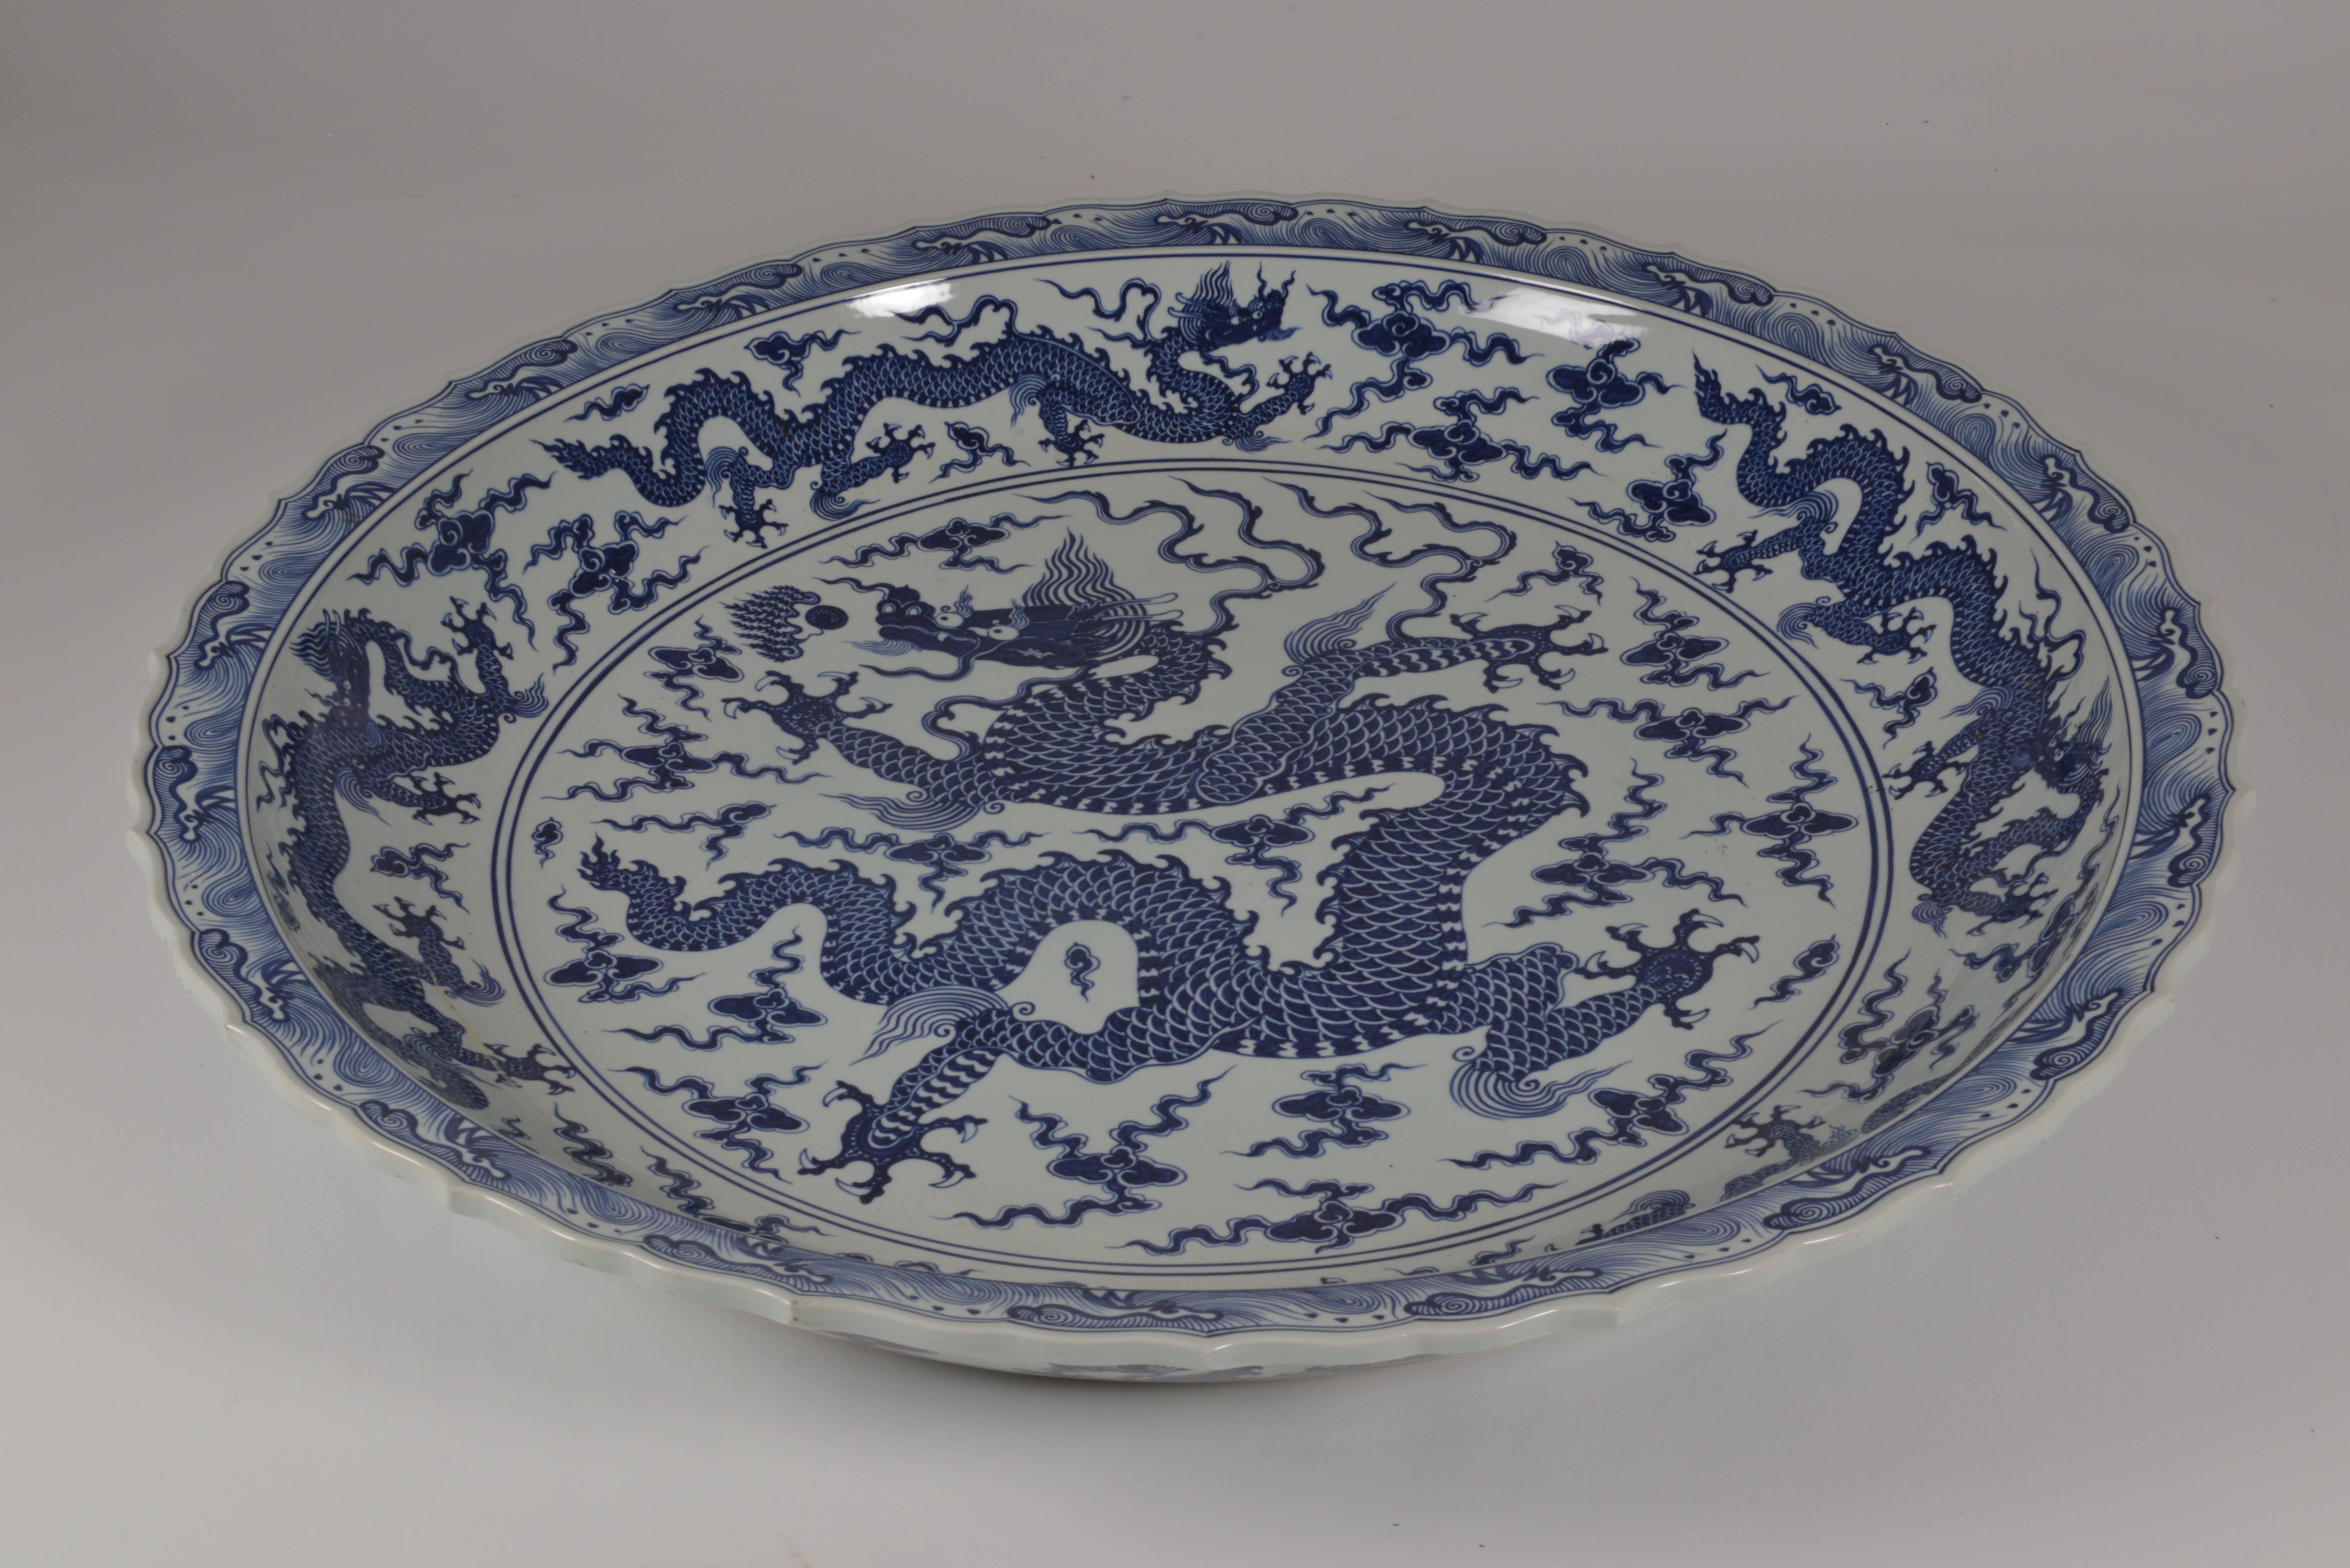 Gigantic Chinese Porcelain Plate 2